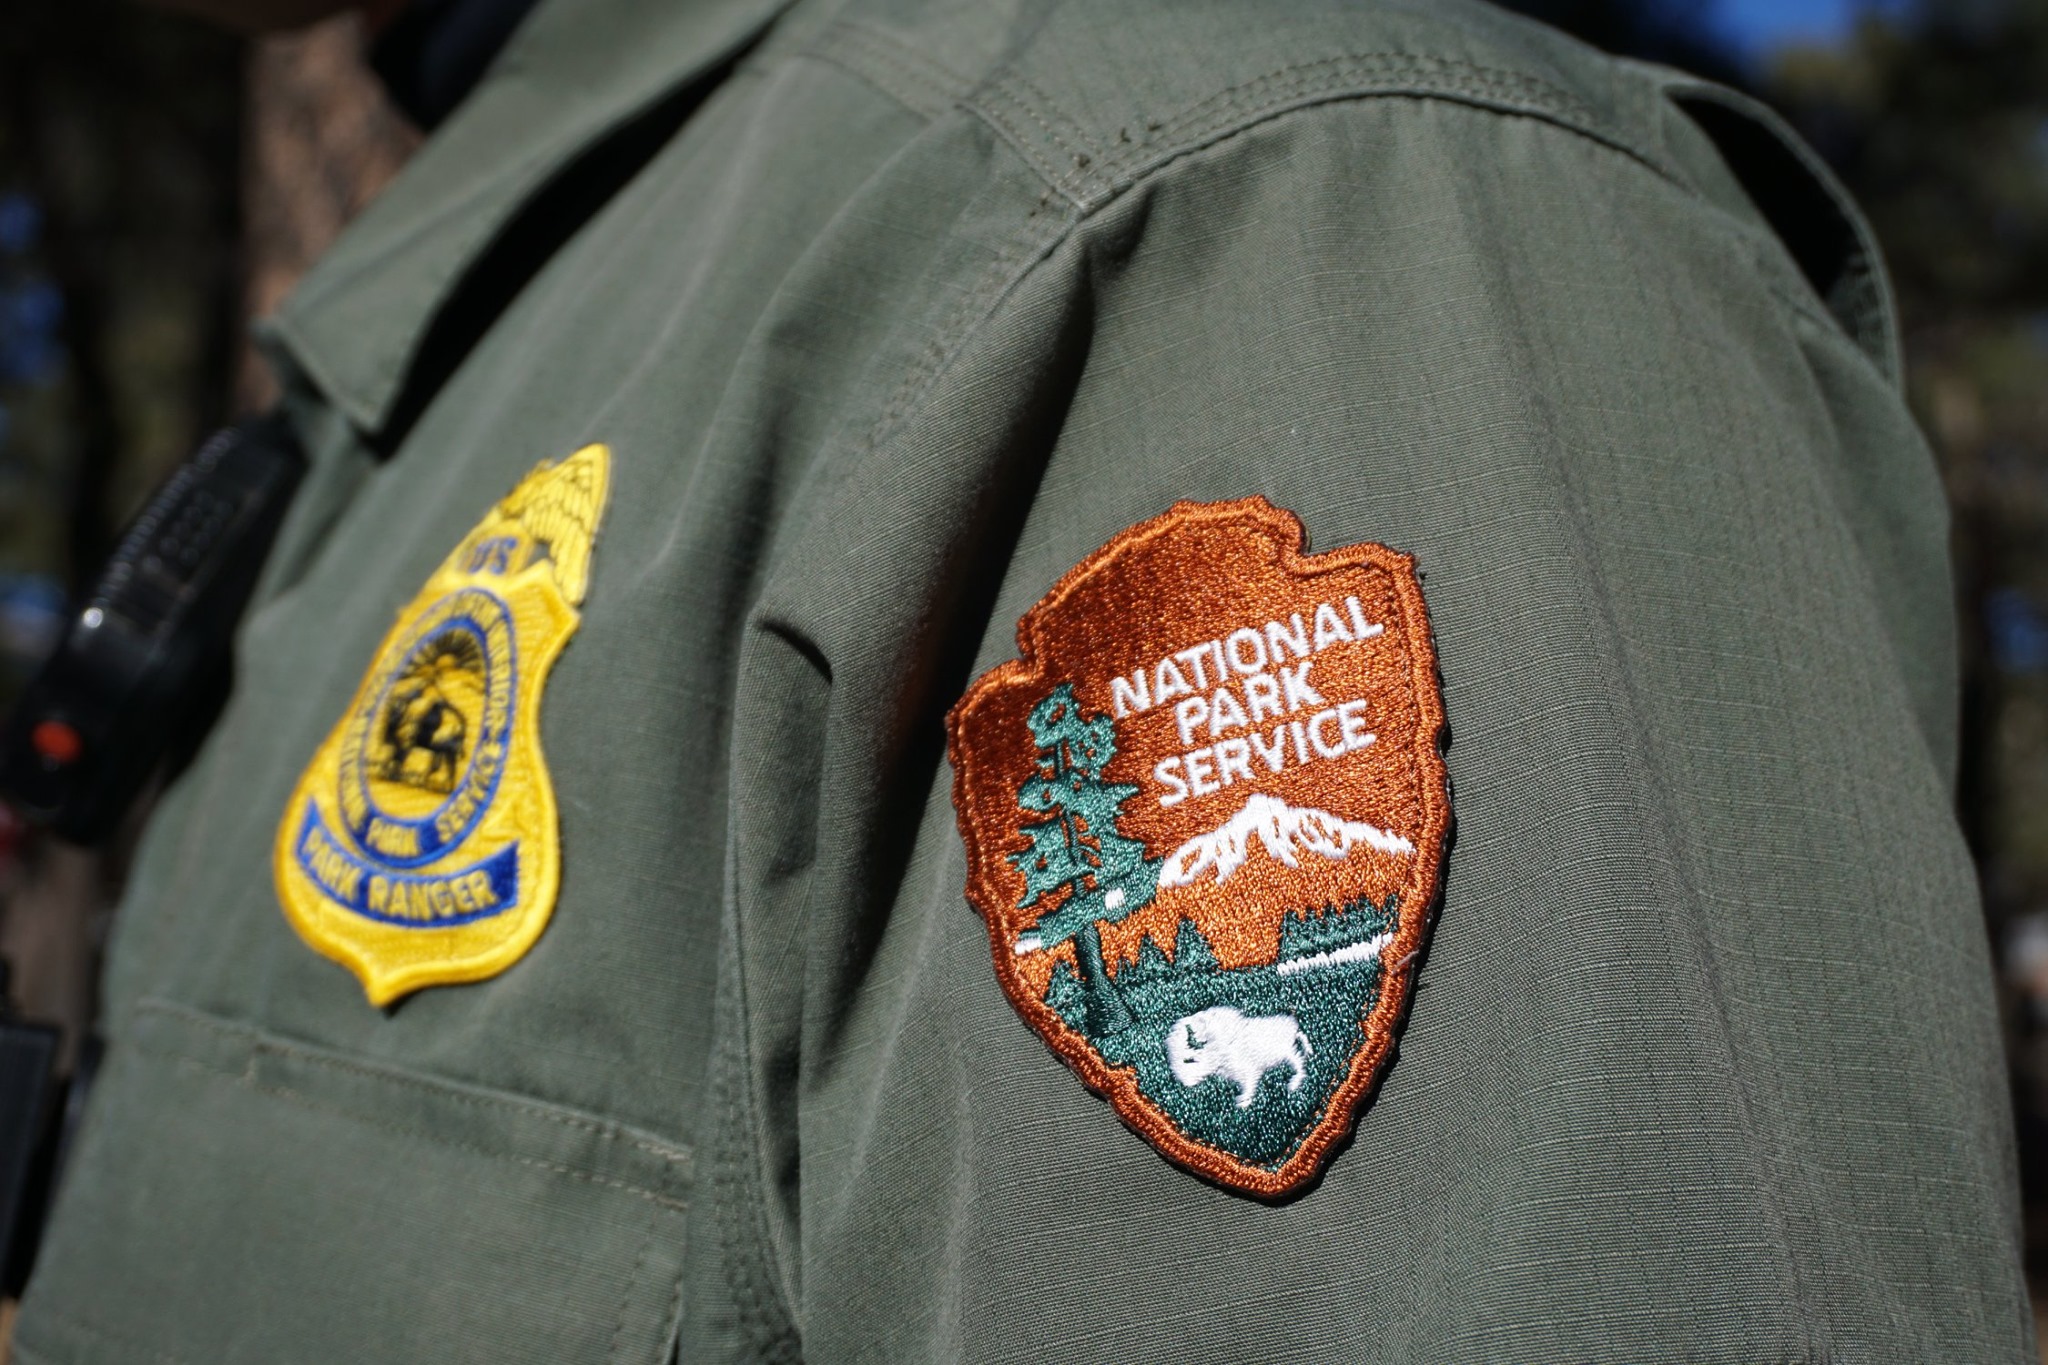 An embroidered orange and green arrowhead patch with a white bison and the words National Park Service at the top. It is on a green uniform shirt with a yellow and blue embroided Park Ranger badge.